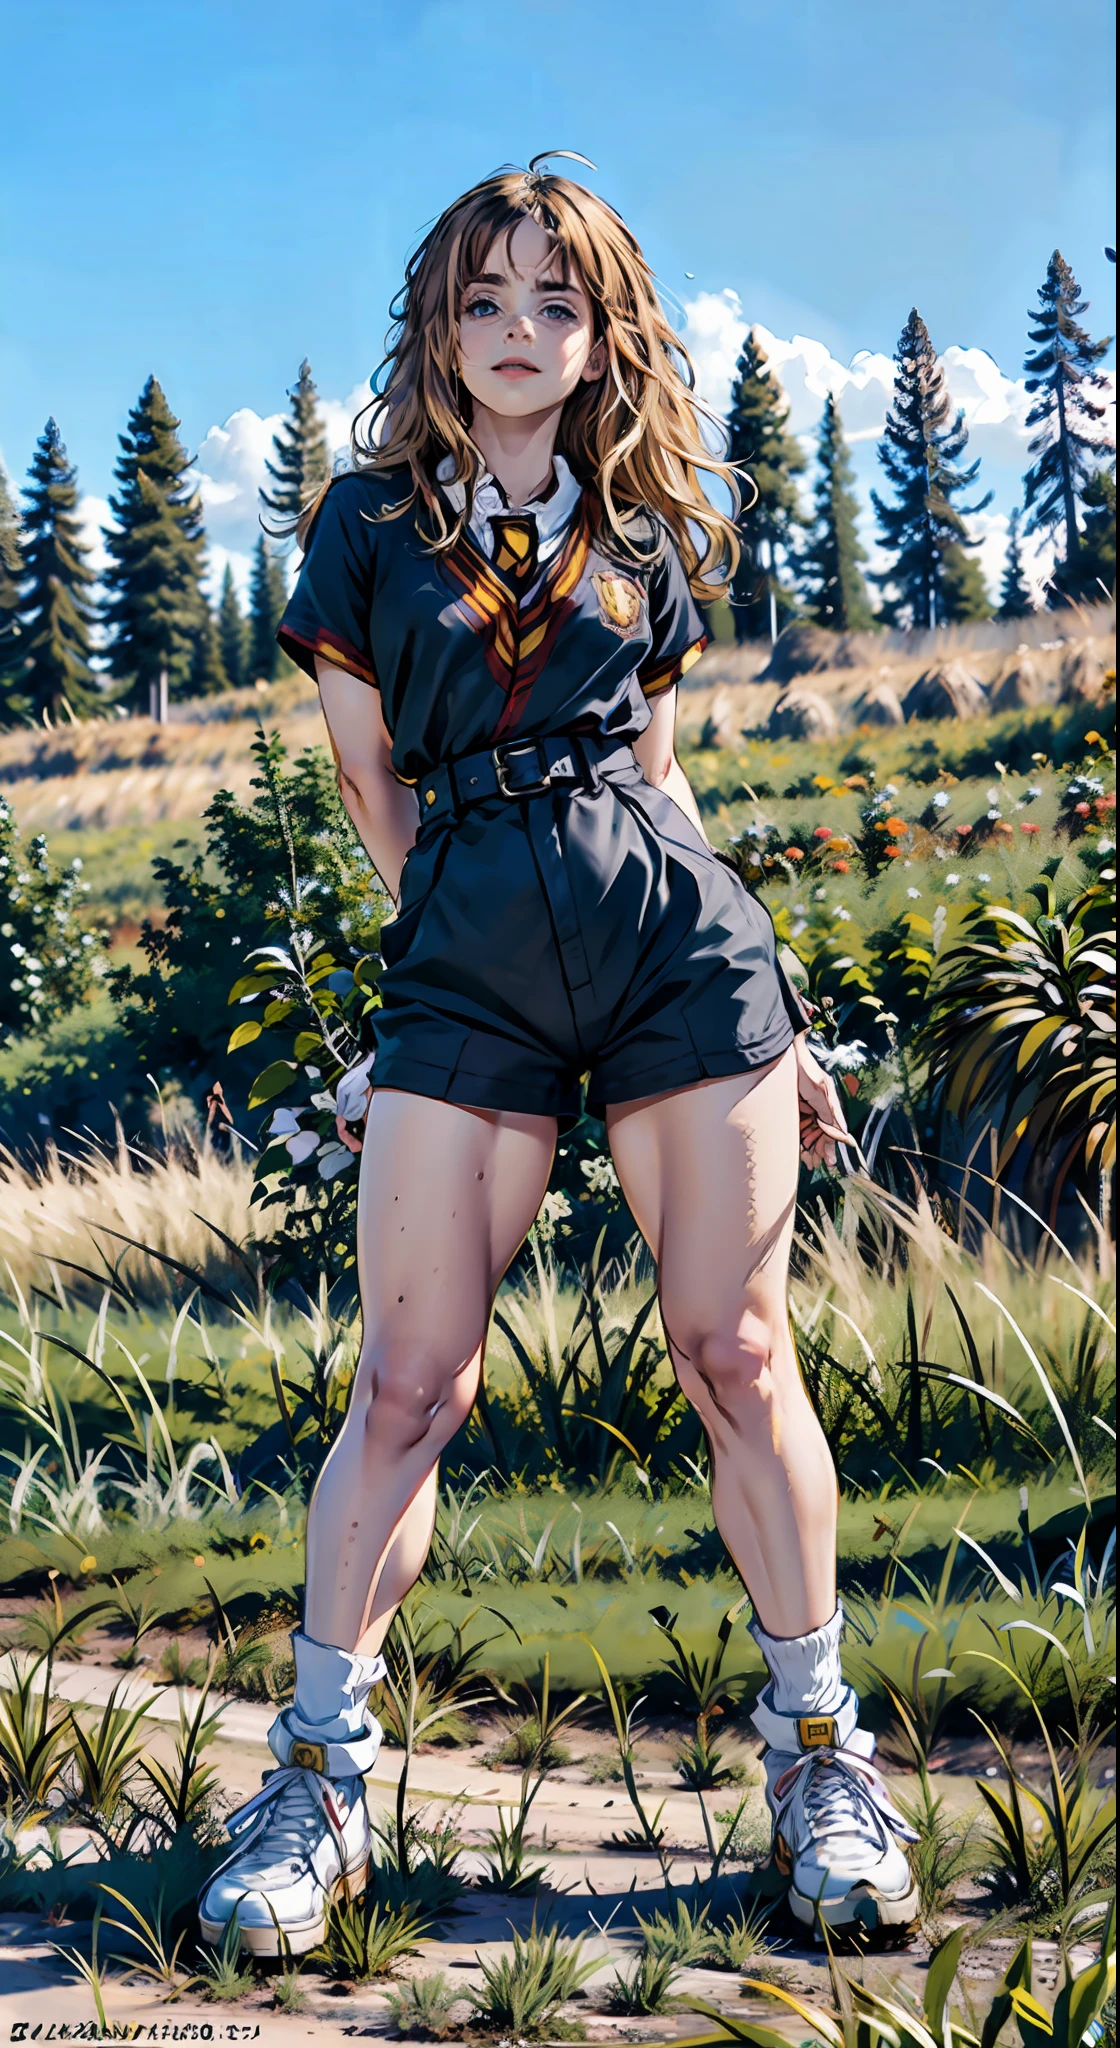 Hermione in a short outfit posing for a photo, big-ass, thick-thighs, massive legs towering over you, legs thick, full body in sight, thighs exposed!!!, thicc, cute face with arms and legs, skin-tight outfit, Full-body image, full body length shot, sexy look, tight costume, in full growth,  short robust woman, very well made face, face in 8k